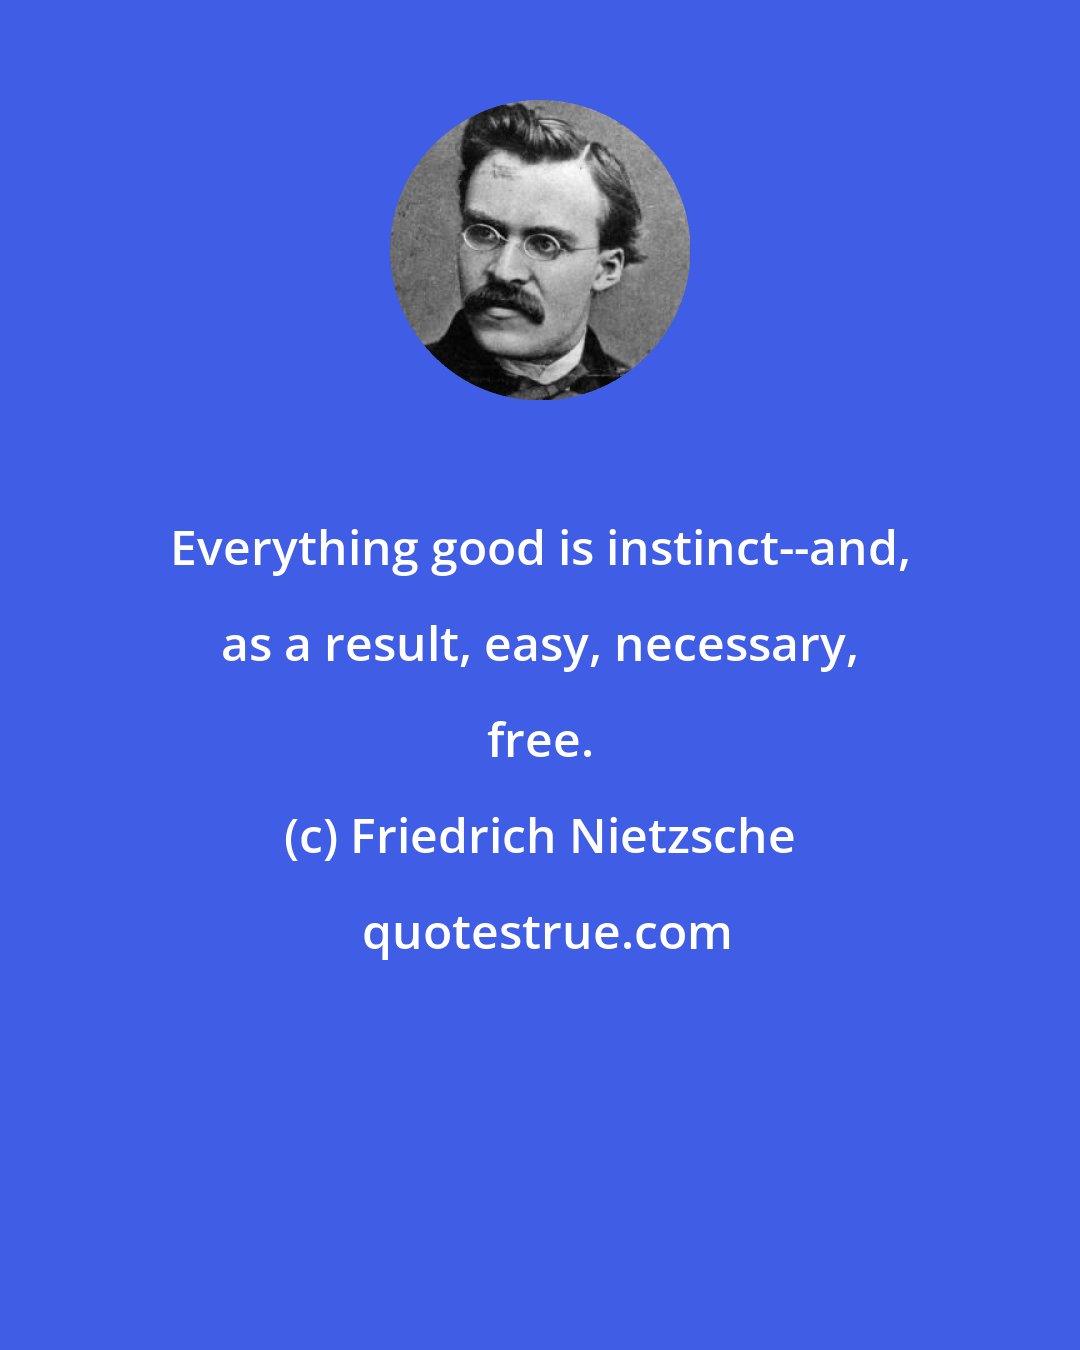 Friedrich Nietzsche: Everything good is instinct--and, as a result, easy, necessary, free.